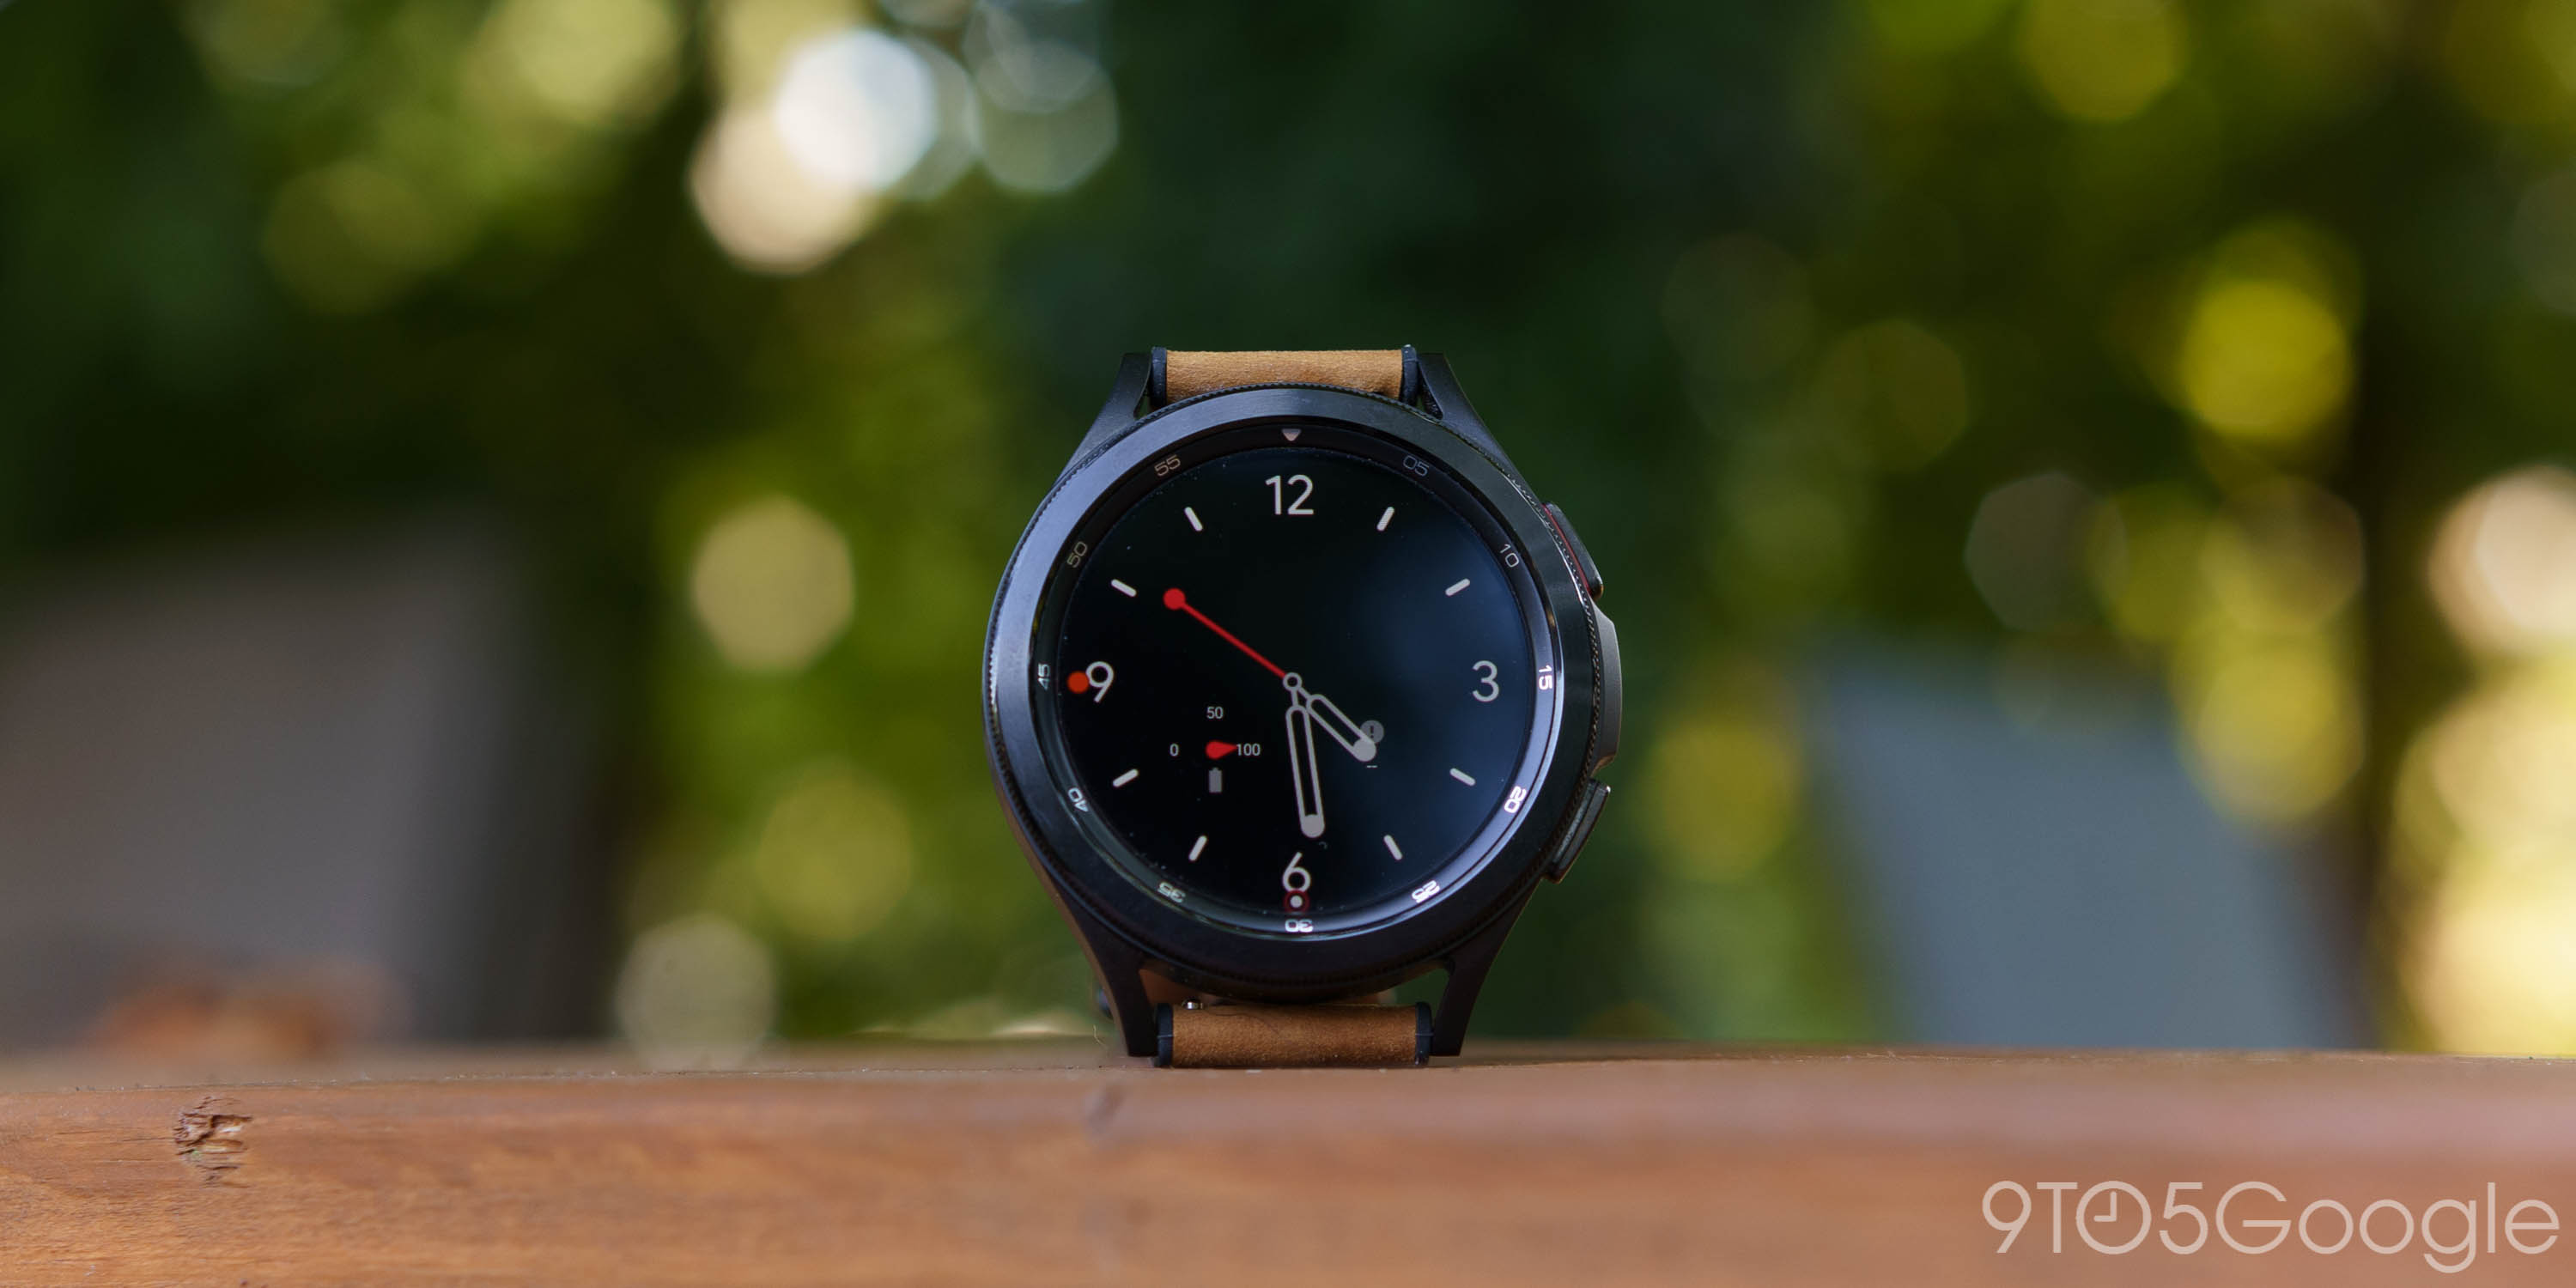 Nothing beats the Galaxy Watch with impressive rival that costs